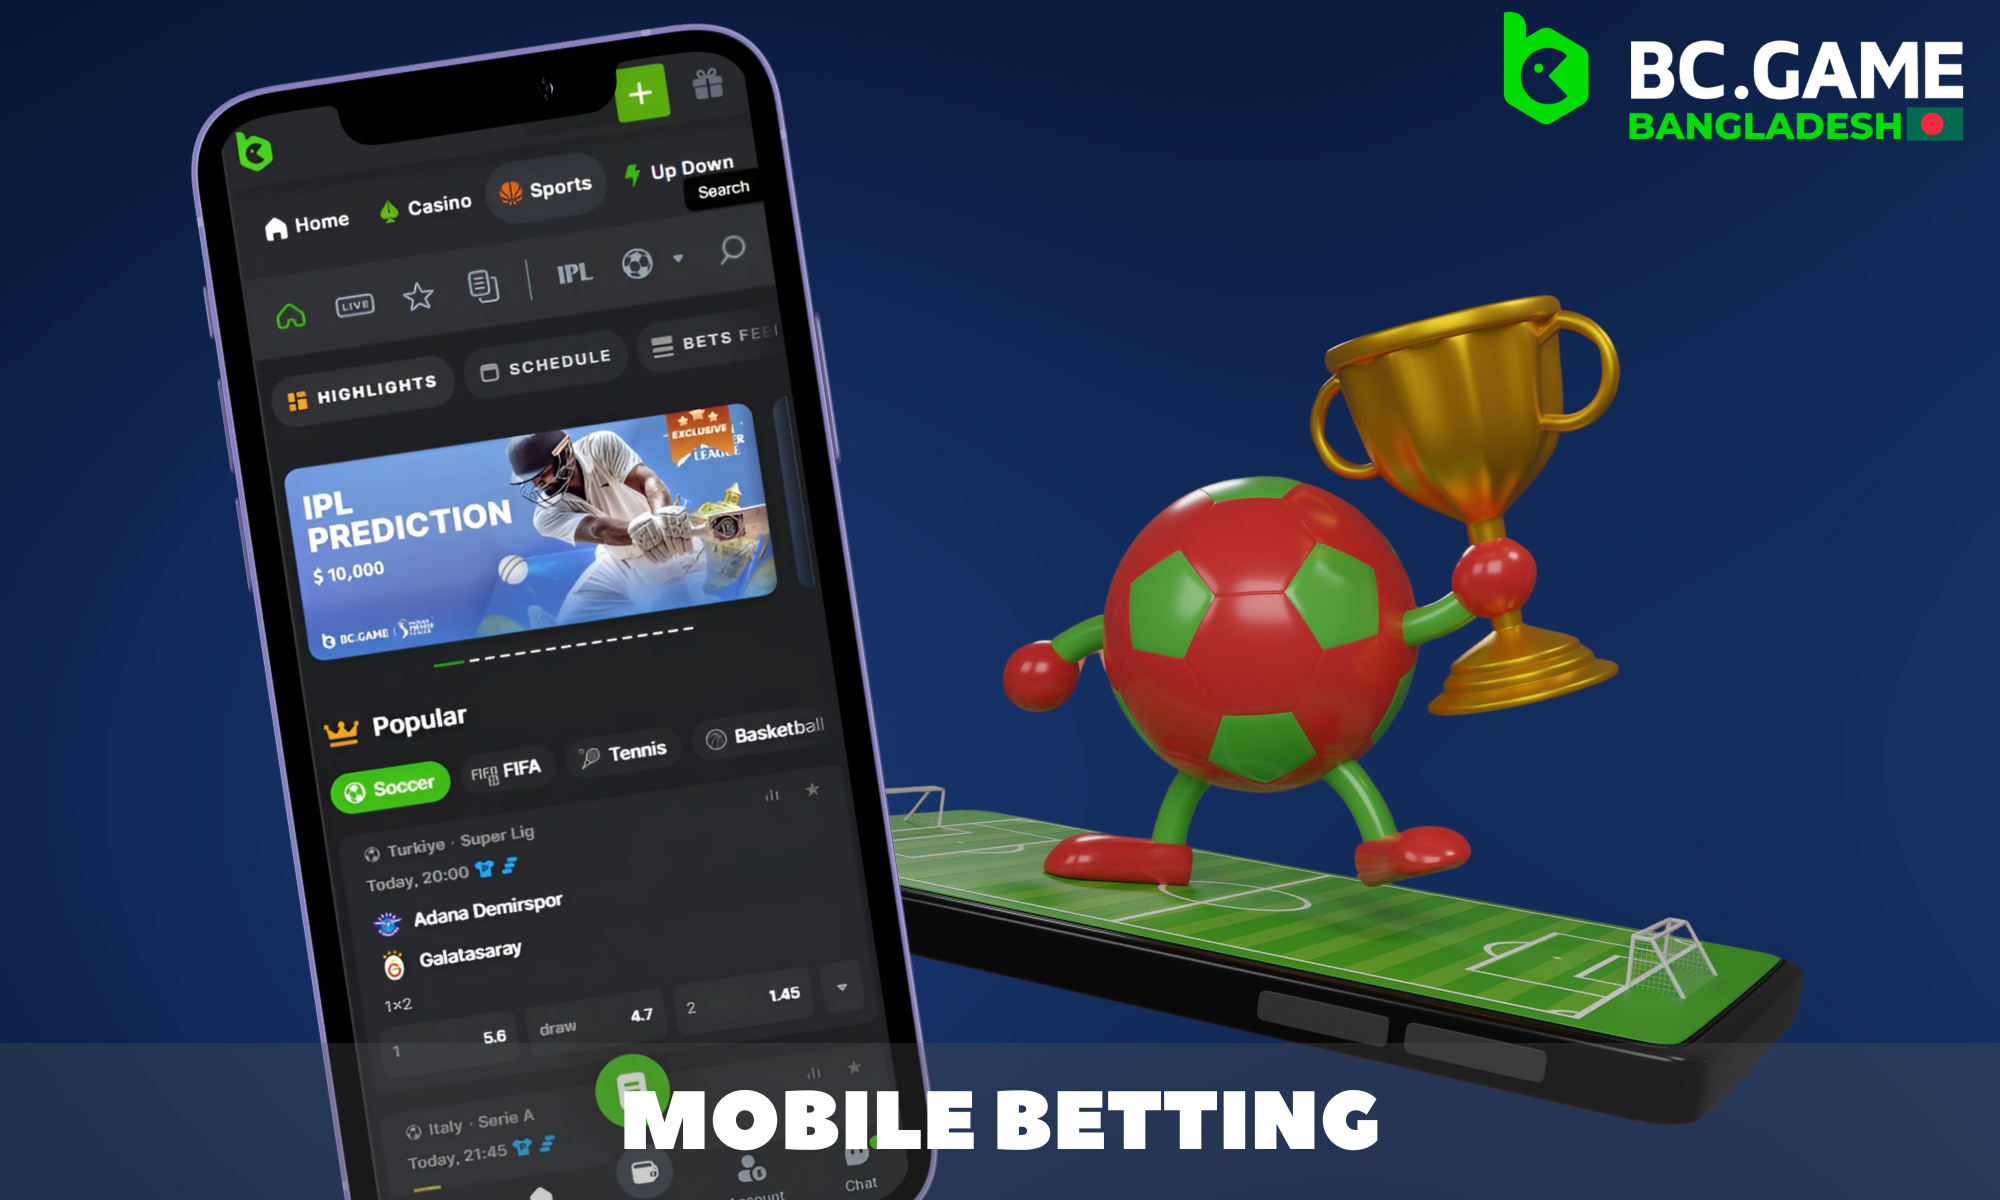 In the BC Game app, players from Bangladesh can bet on their favorite sports with different types of odds